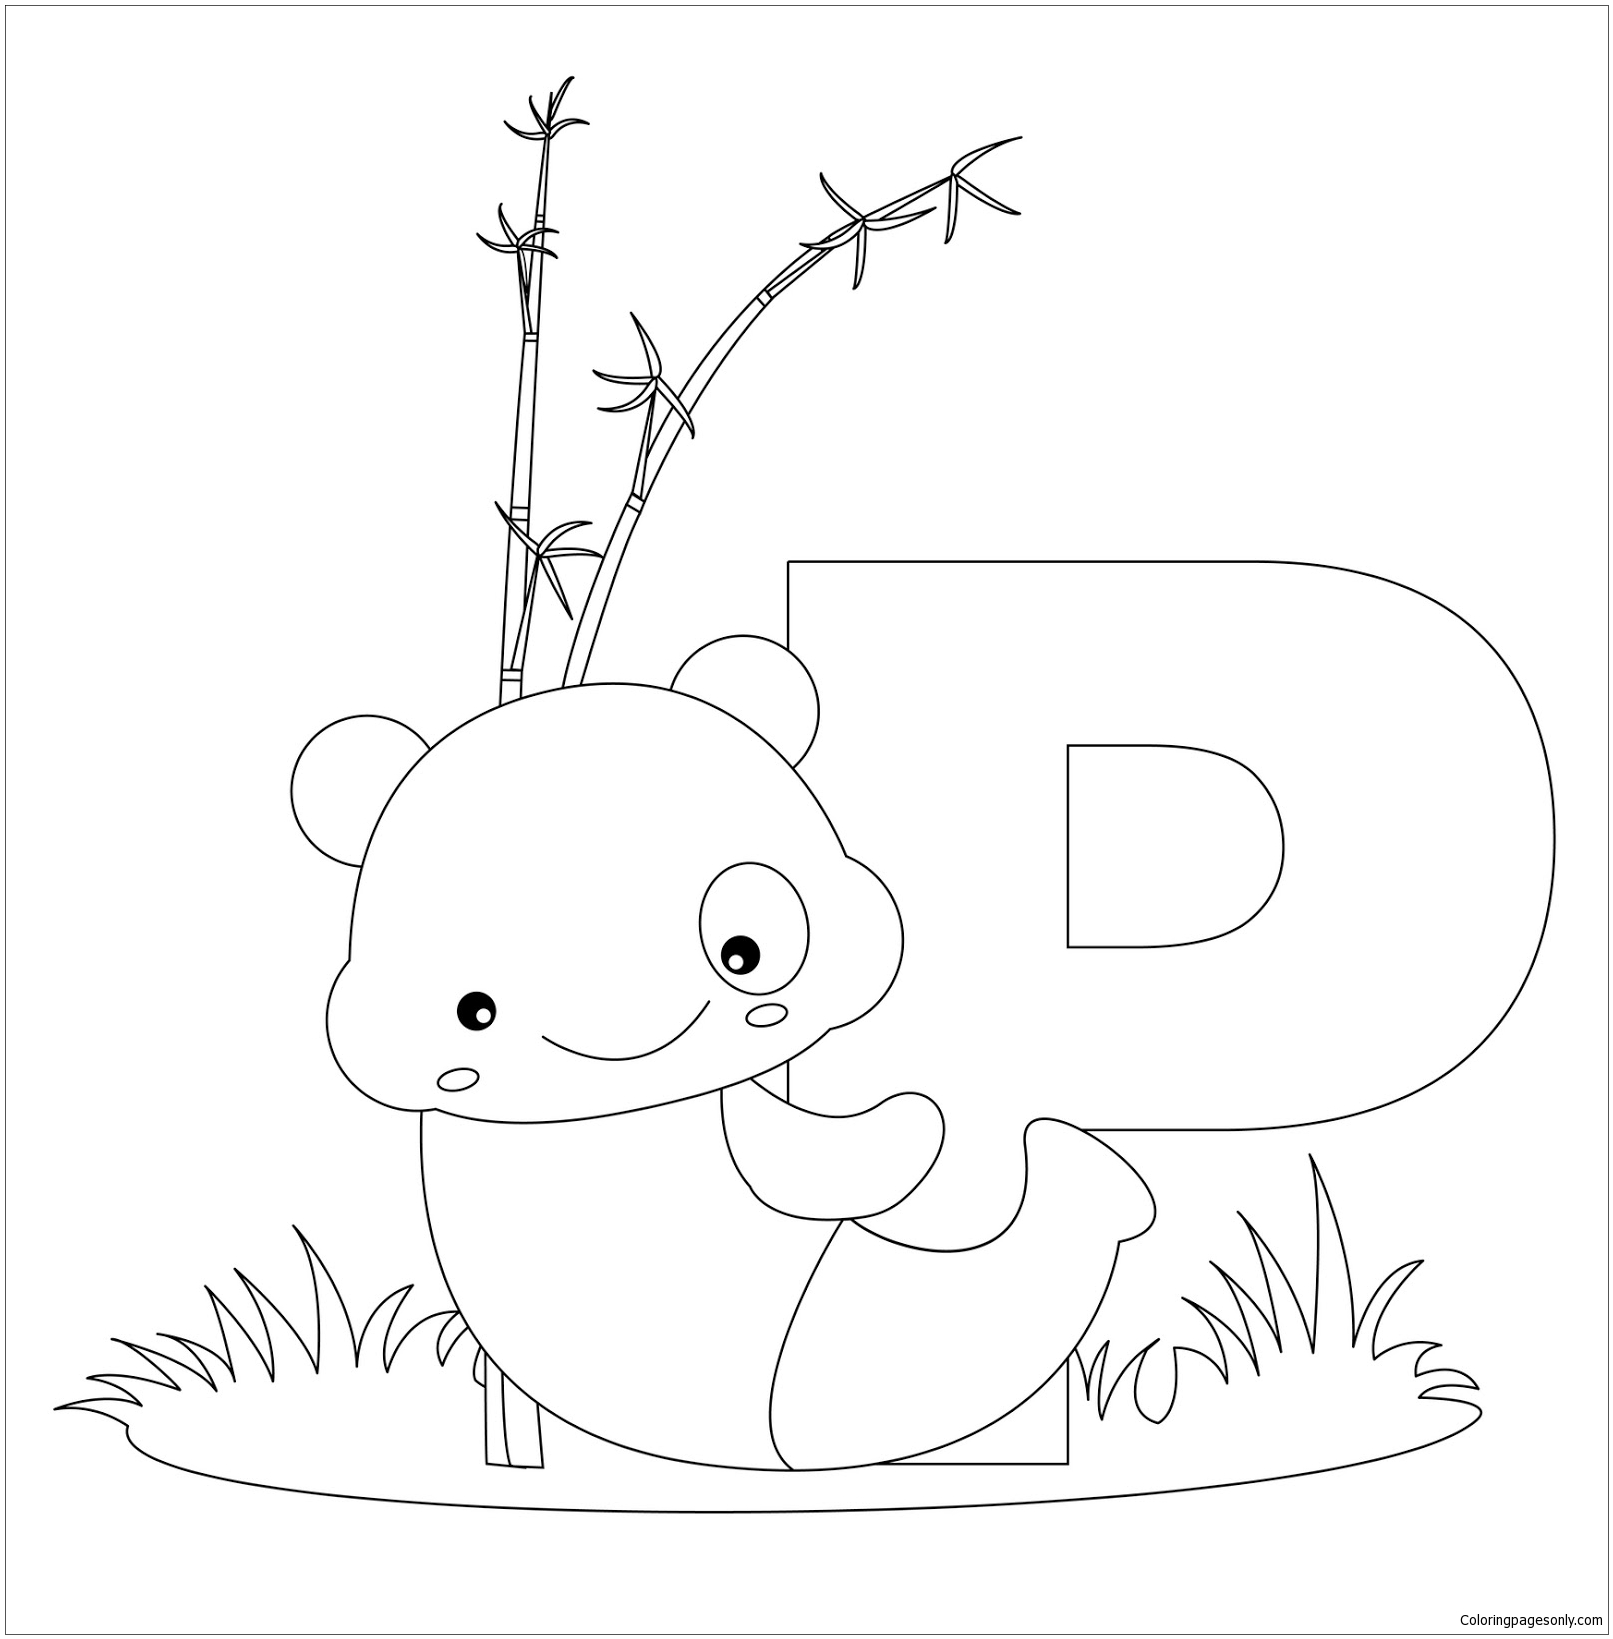 Animal Alphabet Letters Coloring Pages - Alphabet Coloring Pages